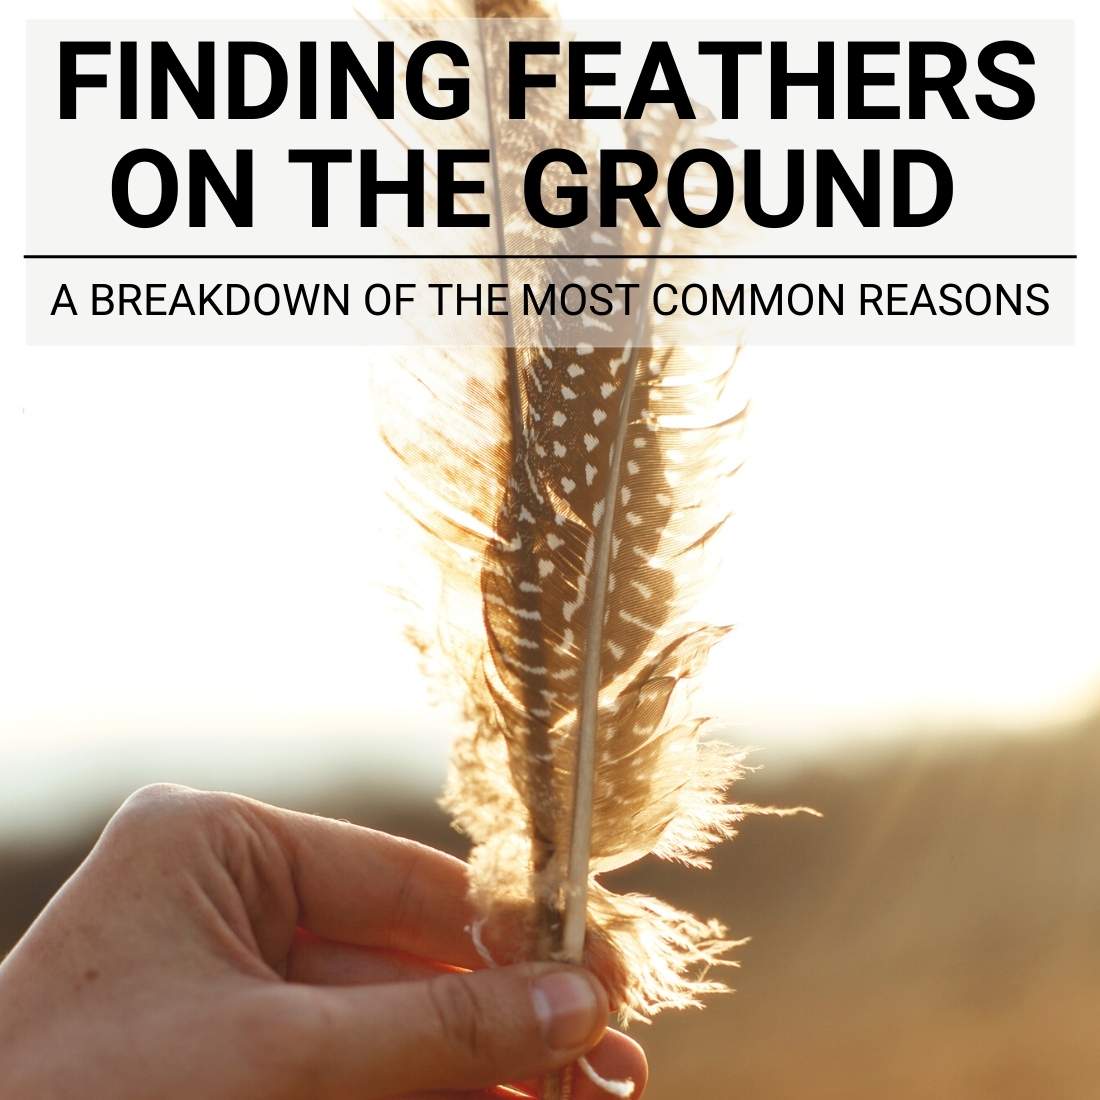 Finding Feathers on the ground